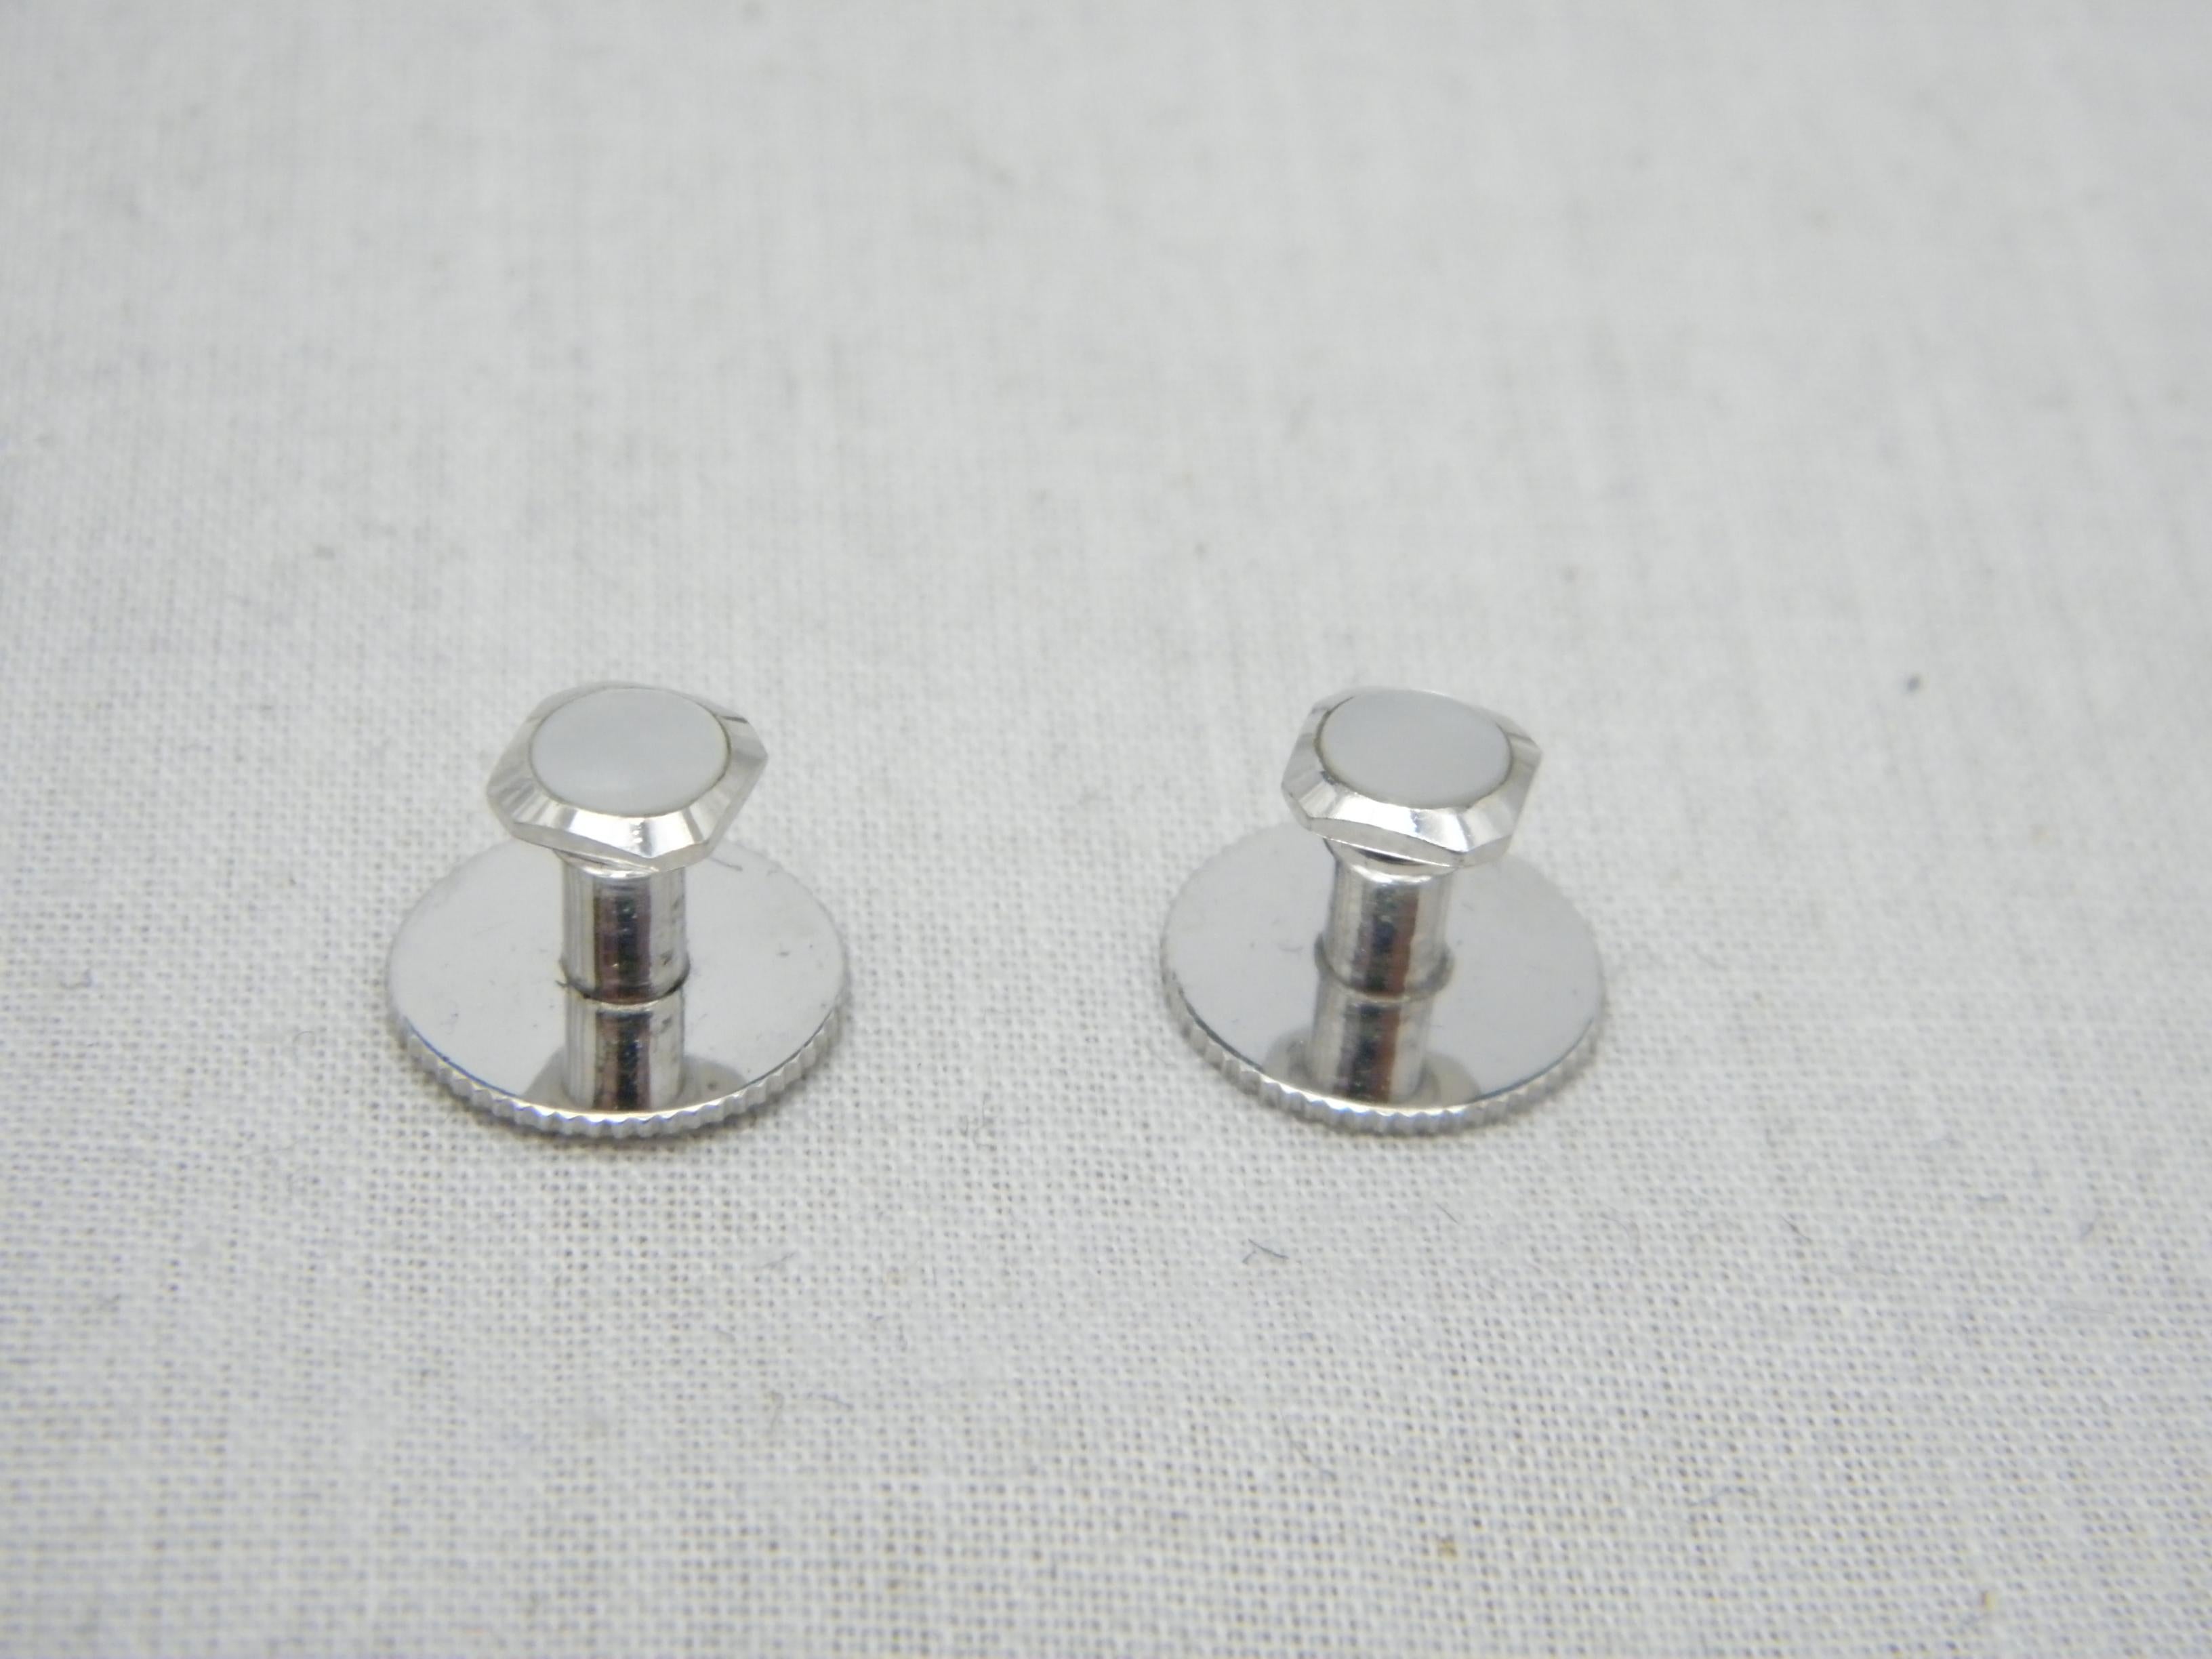 Vintage 9ct White Gold Cufflinks Collar Stud Set 375 Purity Heavy 8.2g Cuff Link For Sale 3